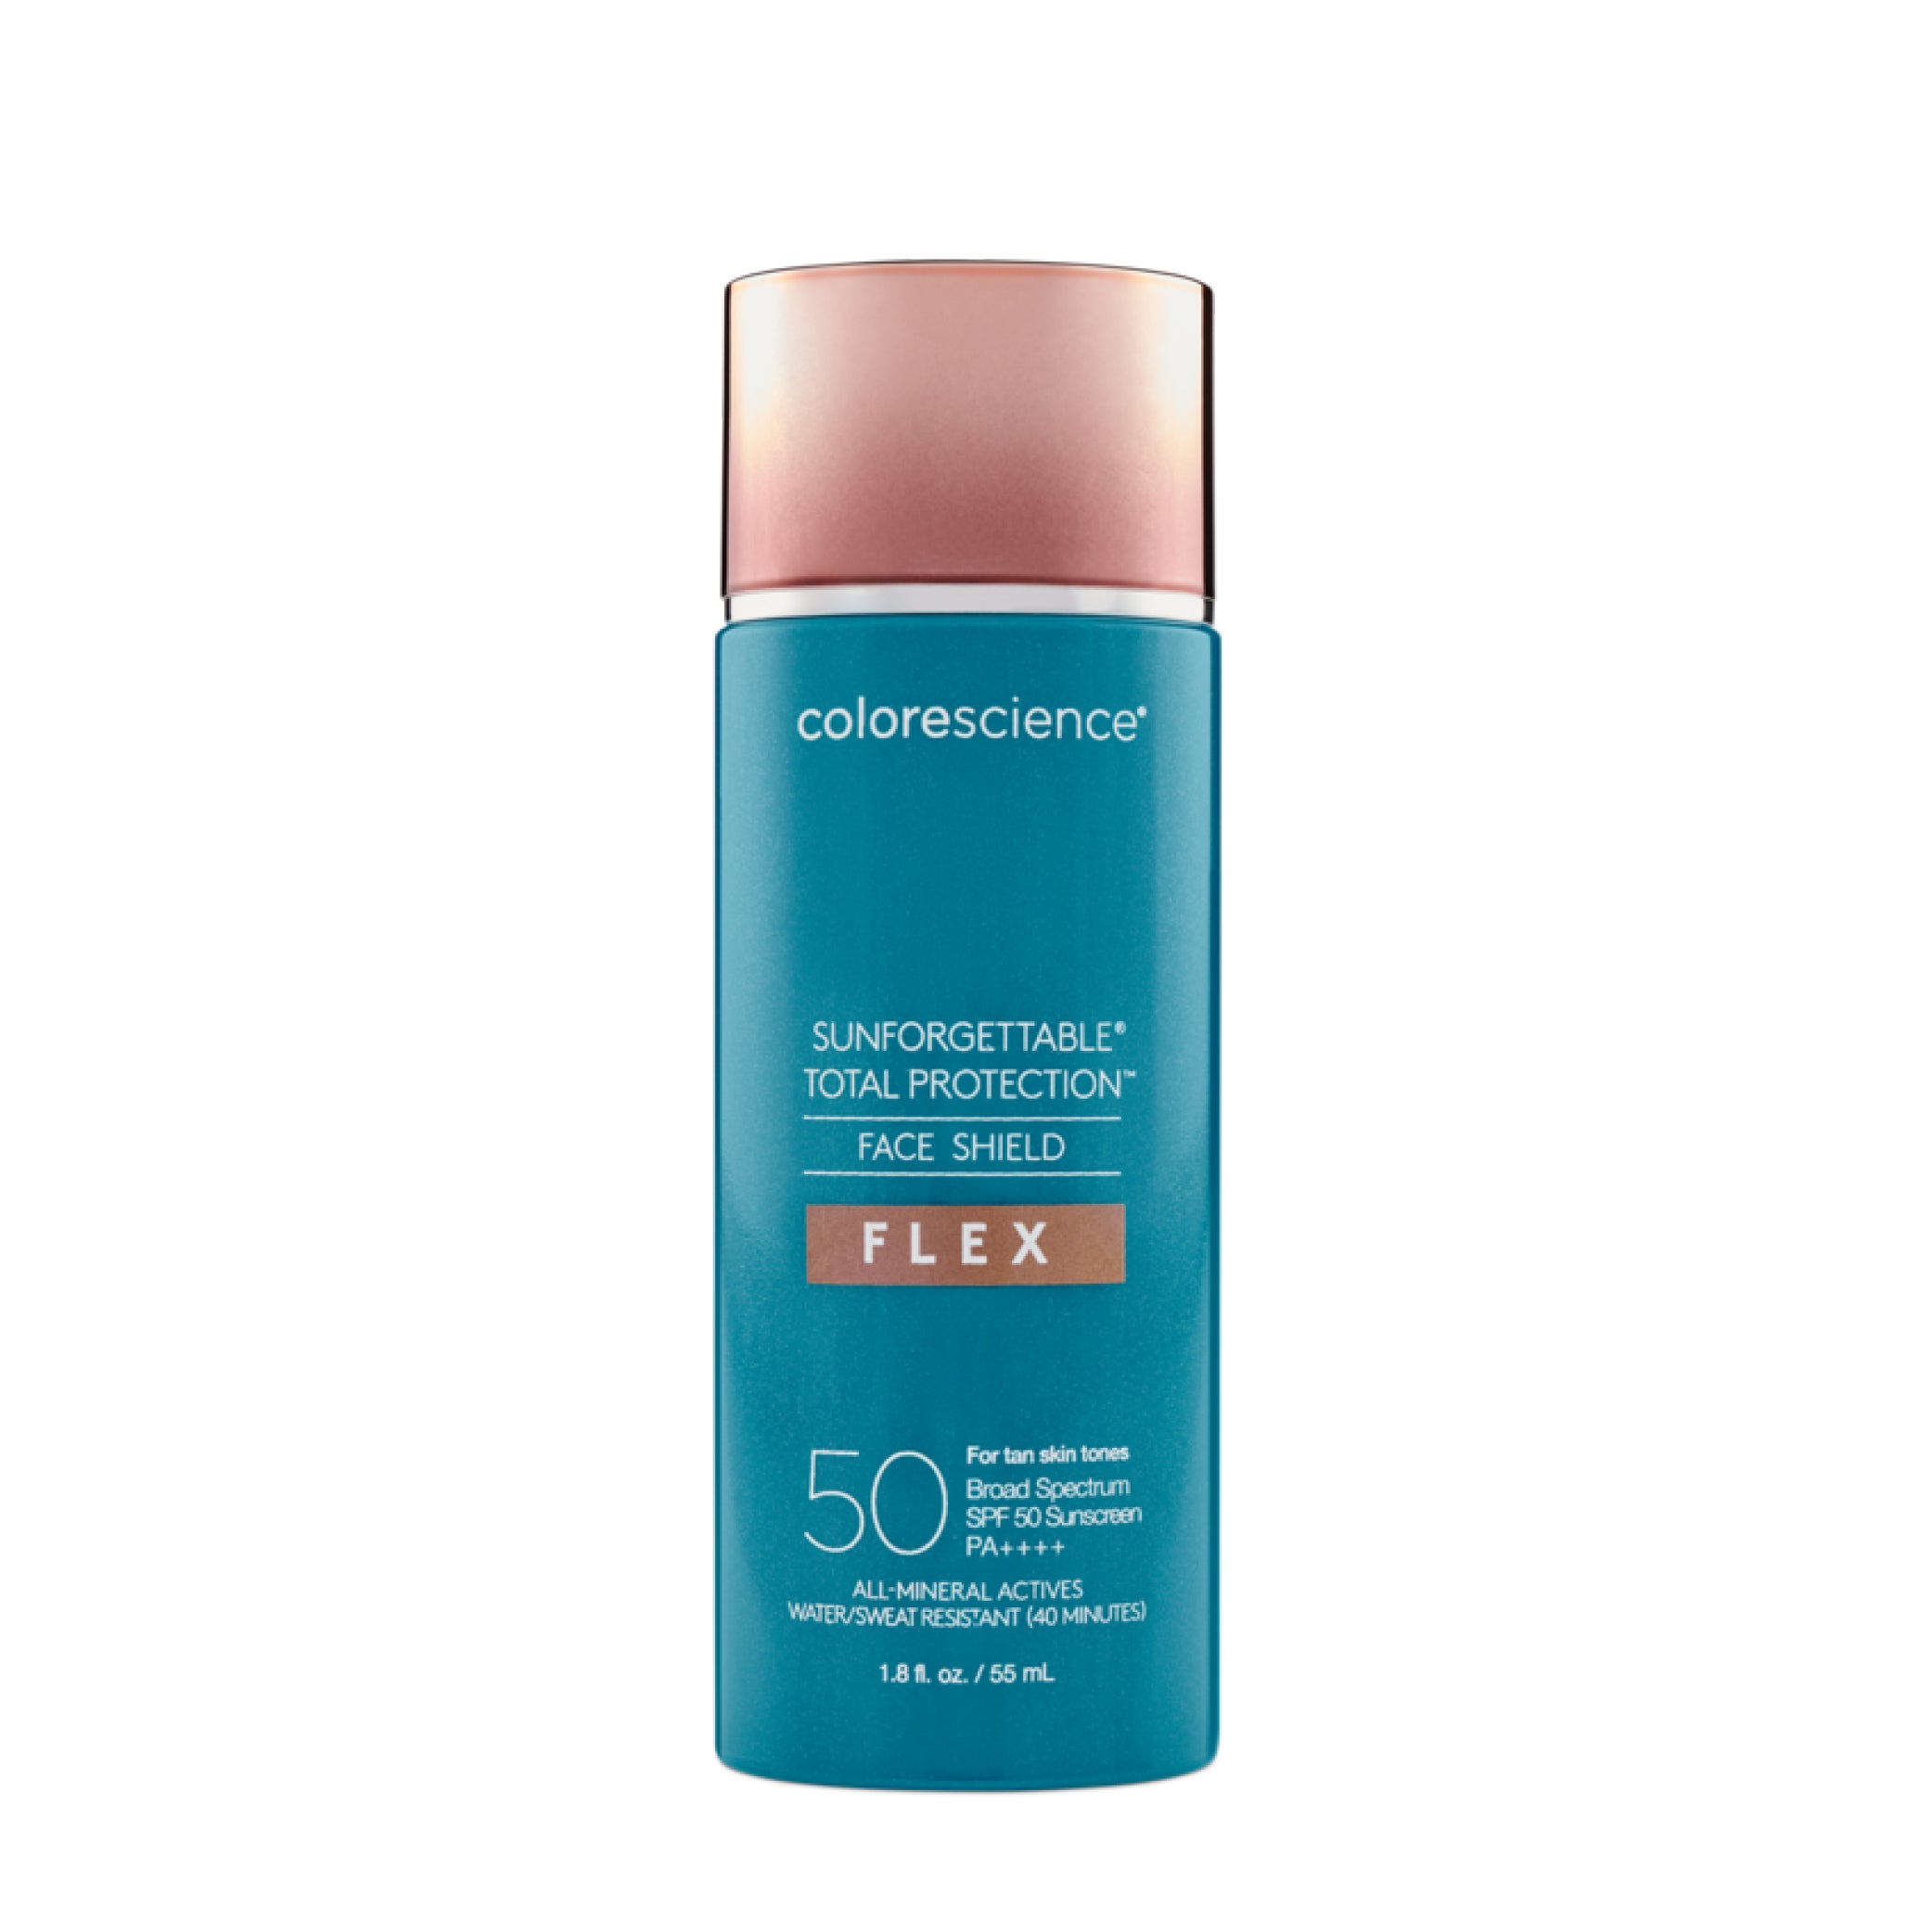 Sunforgettable® Total Protection™ Face Shield Flex SPF 50 Tan